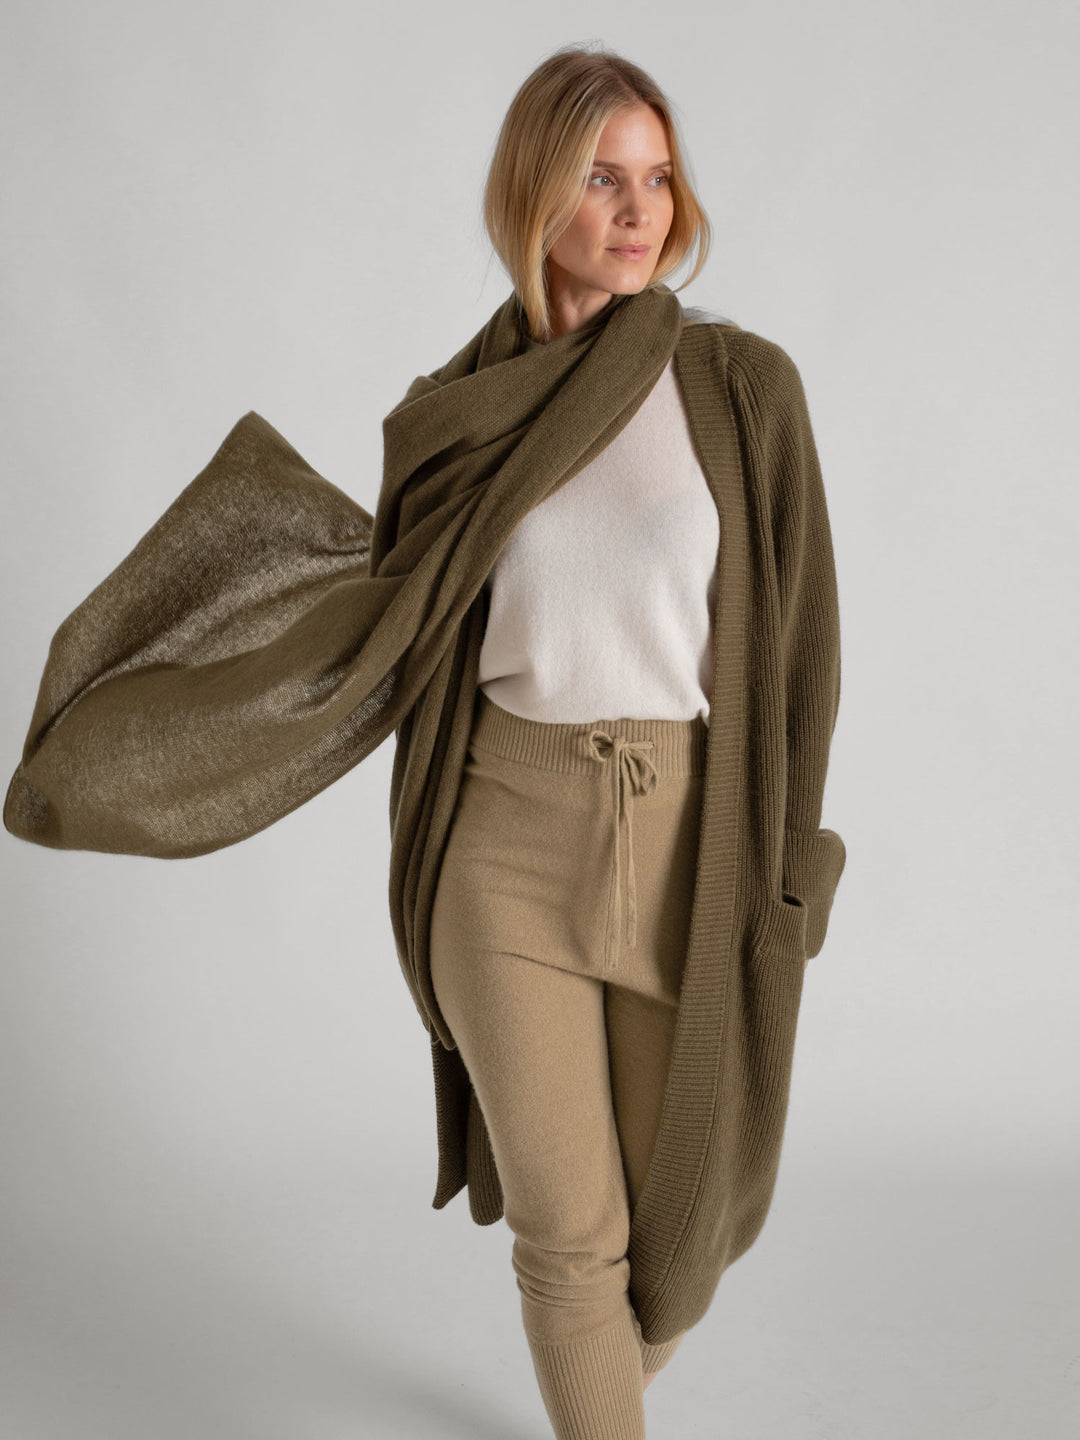 Airy cashmere scarf "Flow".  Color: Hunter - Dark green. 100% cashmere from kashmina.